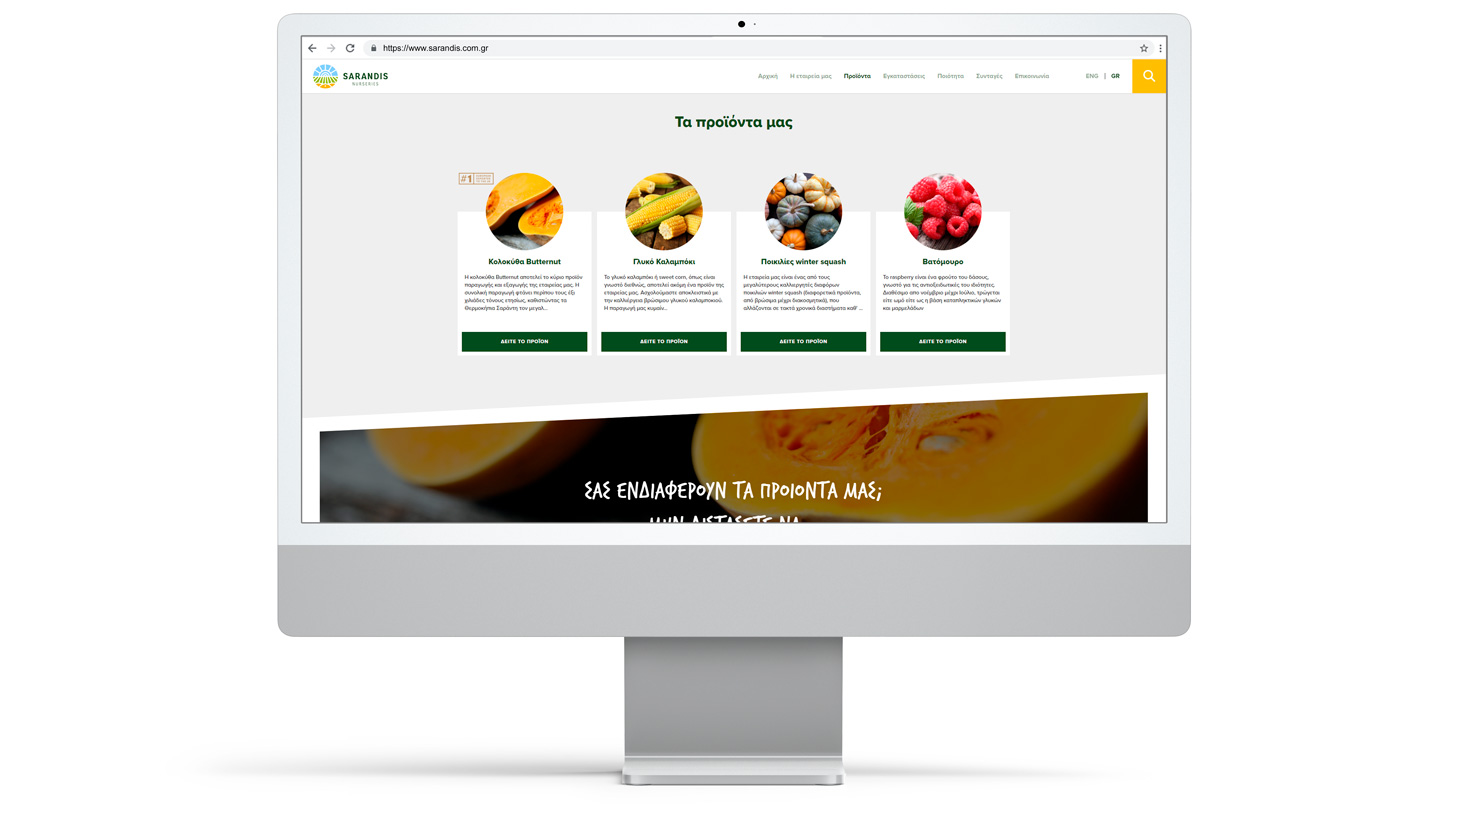 The products page AGRICULTURE